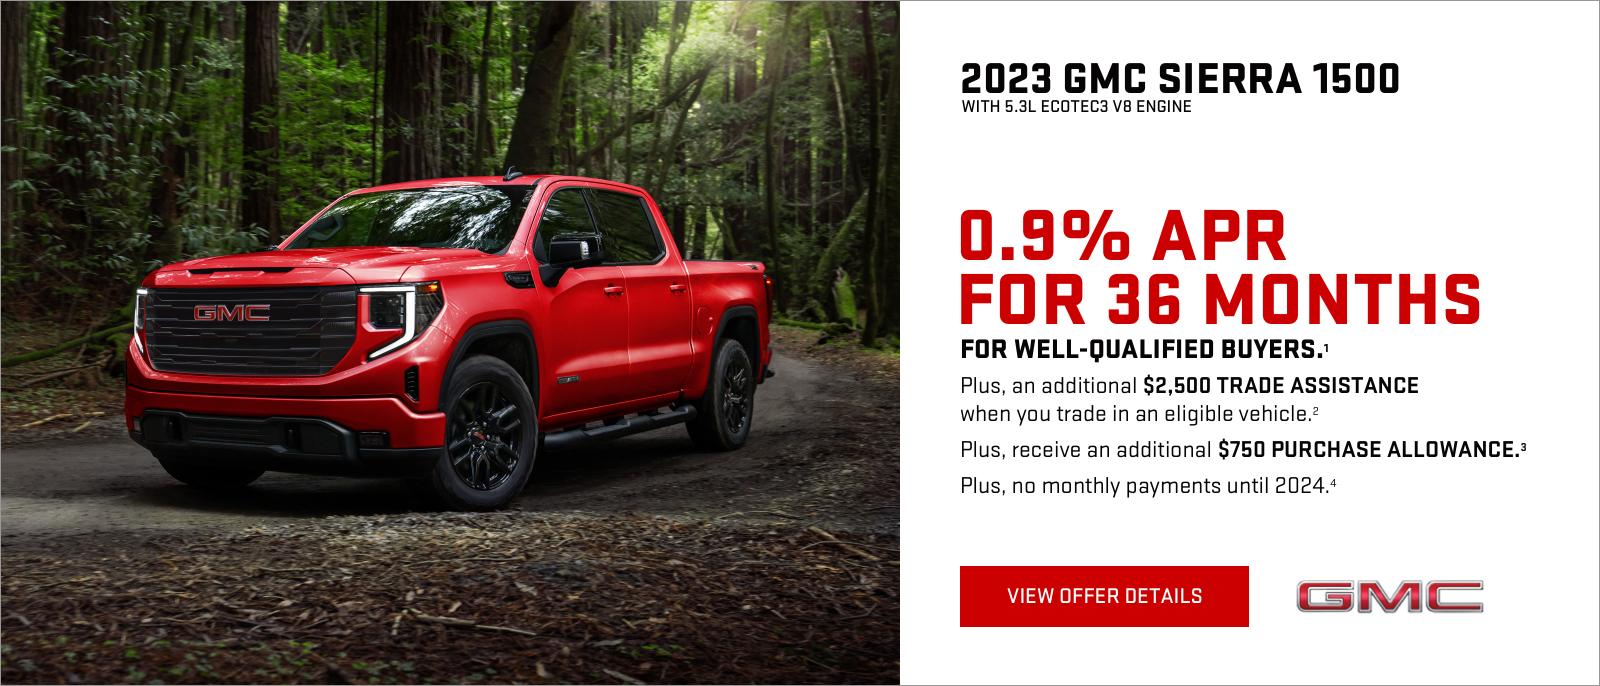 0.9% APR for 36 MONTHS for well-qualified buyers.1

Plus, an additional $2,500 TRADE ASSISTANCE when you trade in an eligible vehicle.2

Plus, receive an additional $750 PURCHASE ALLOWANCE.3

PLUS, NO MONTHLY PAYMENTS UNTIL 2024. 4